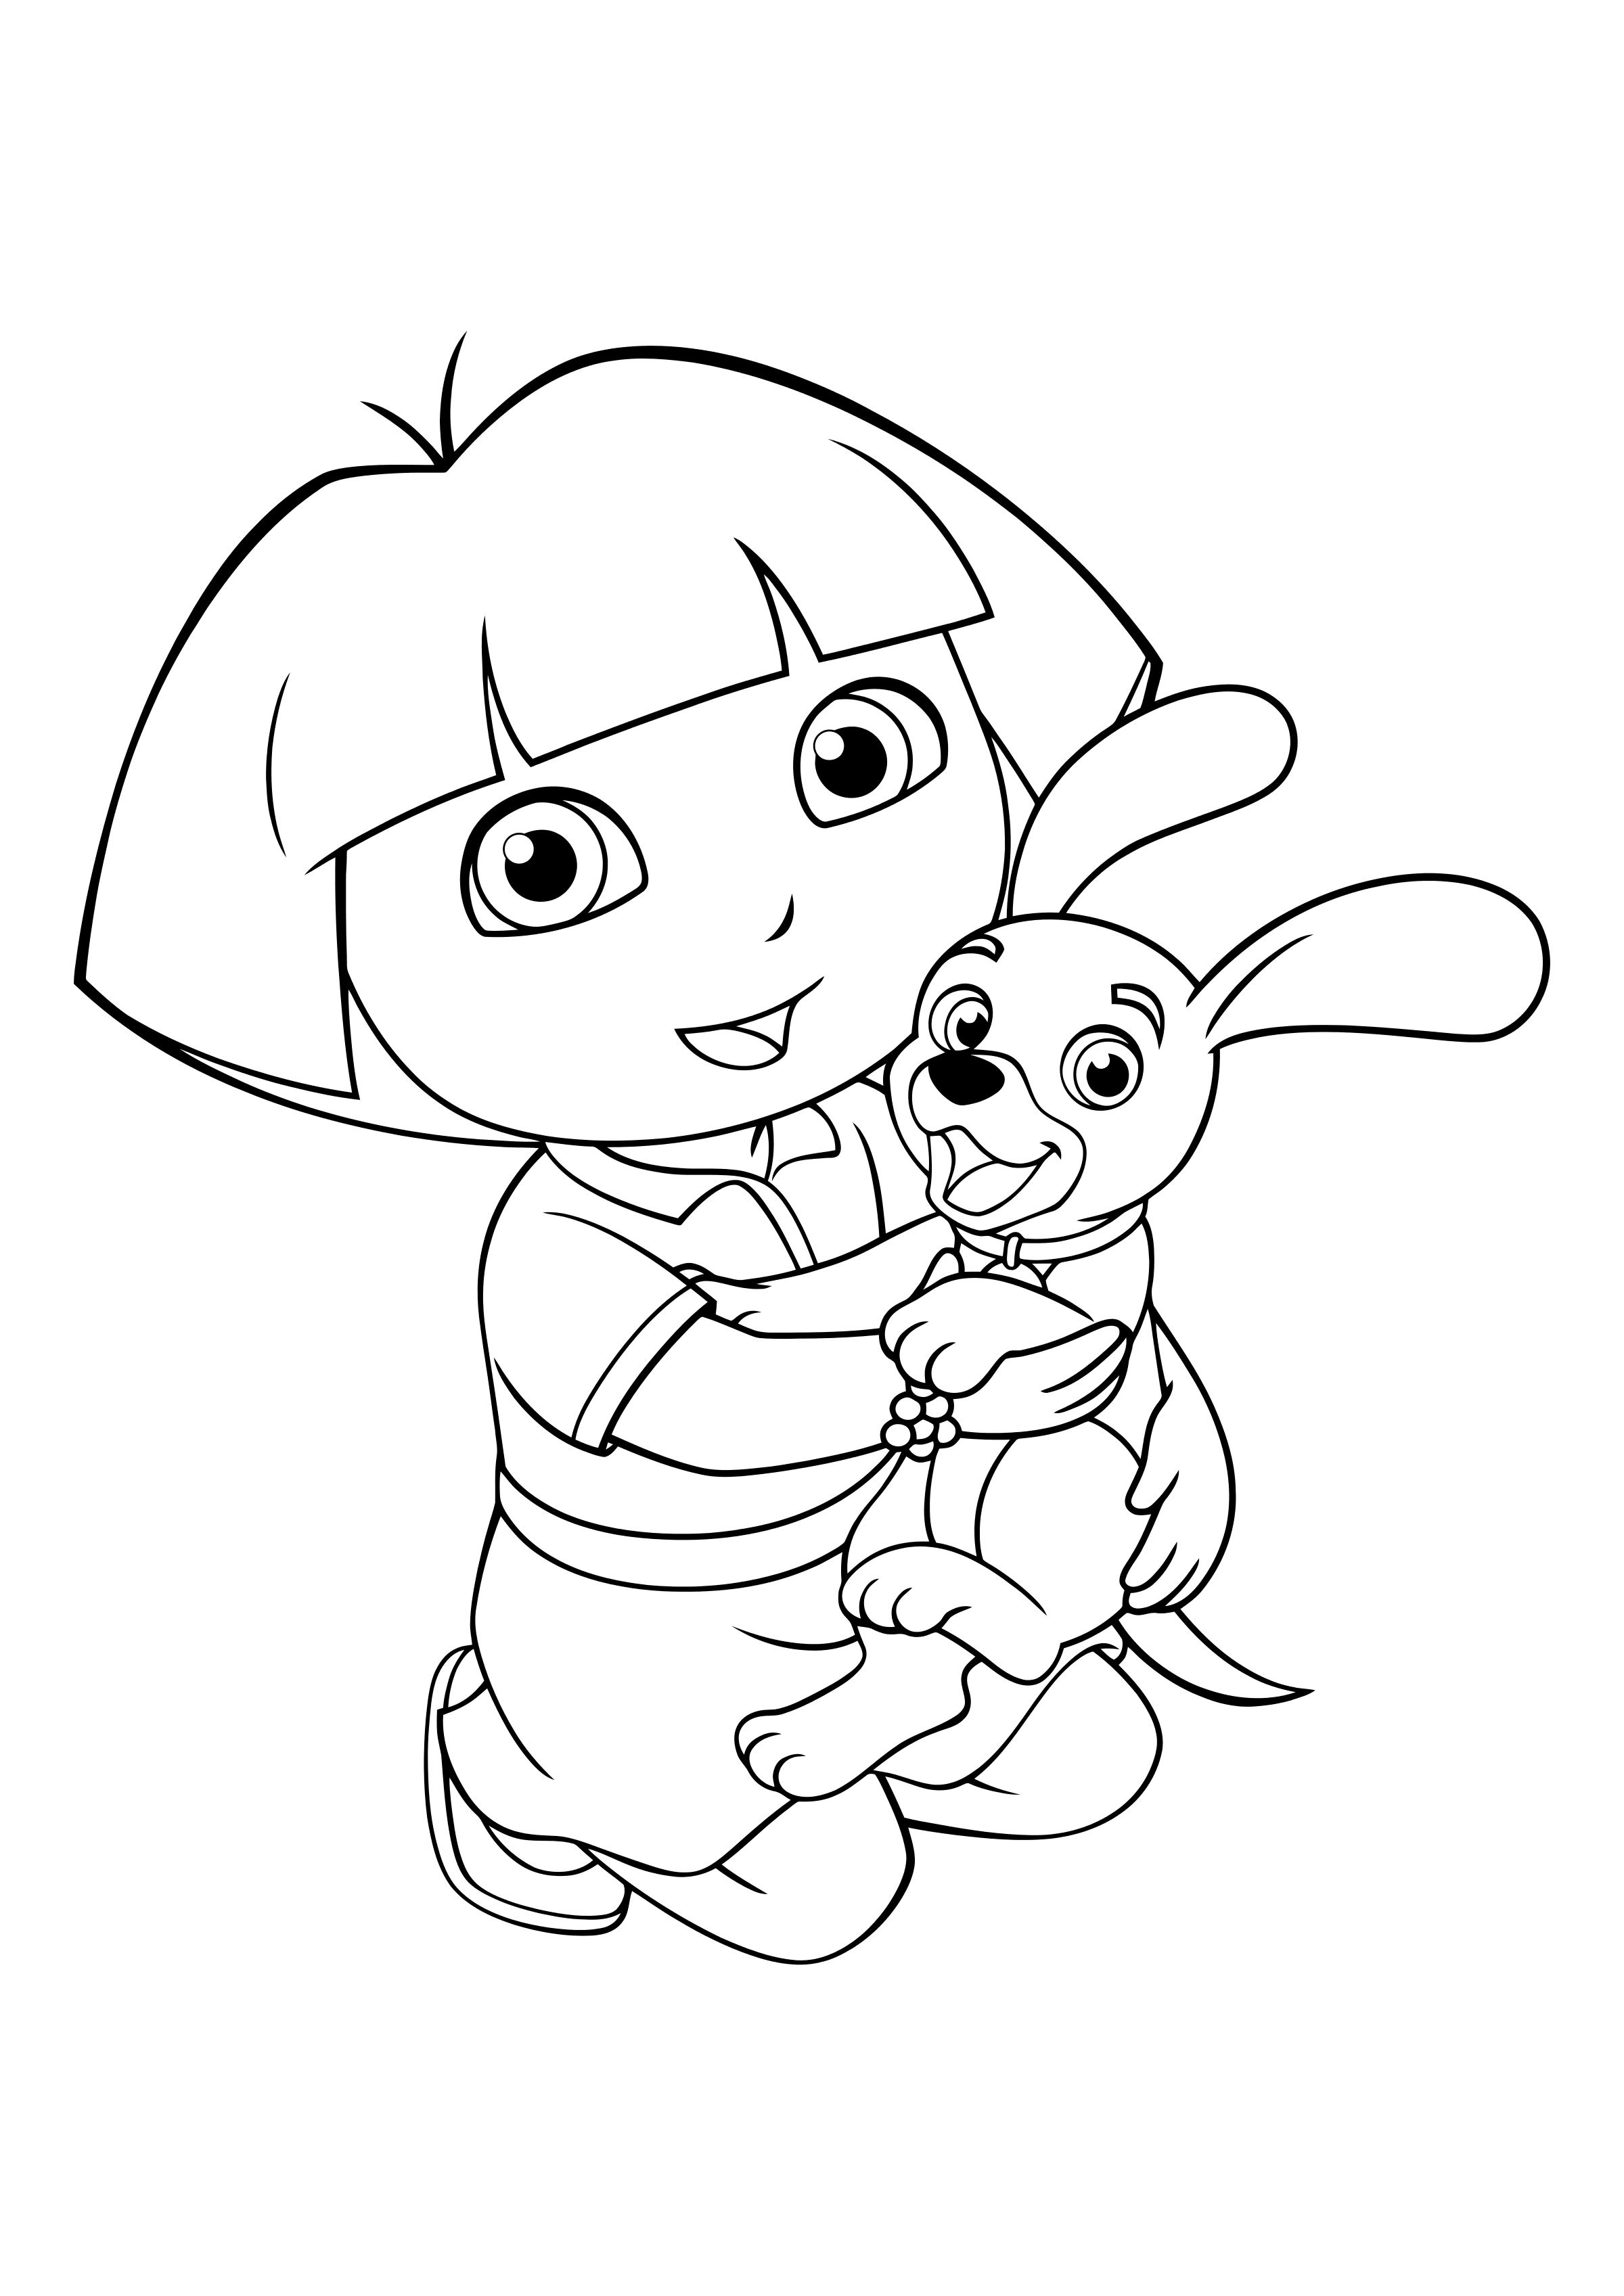 Coloring page Dora the Explorer Dora and the puppy